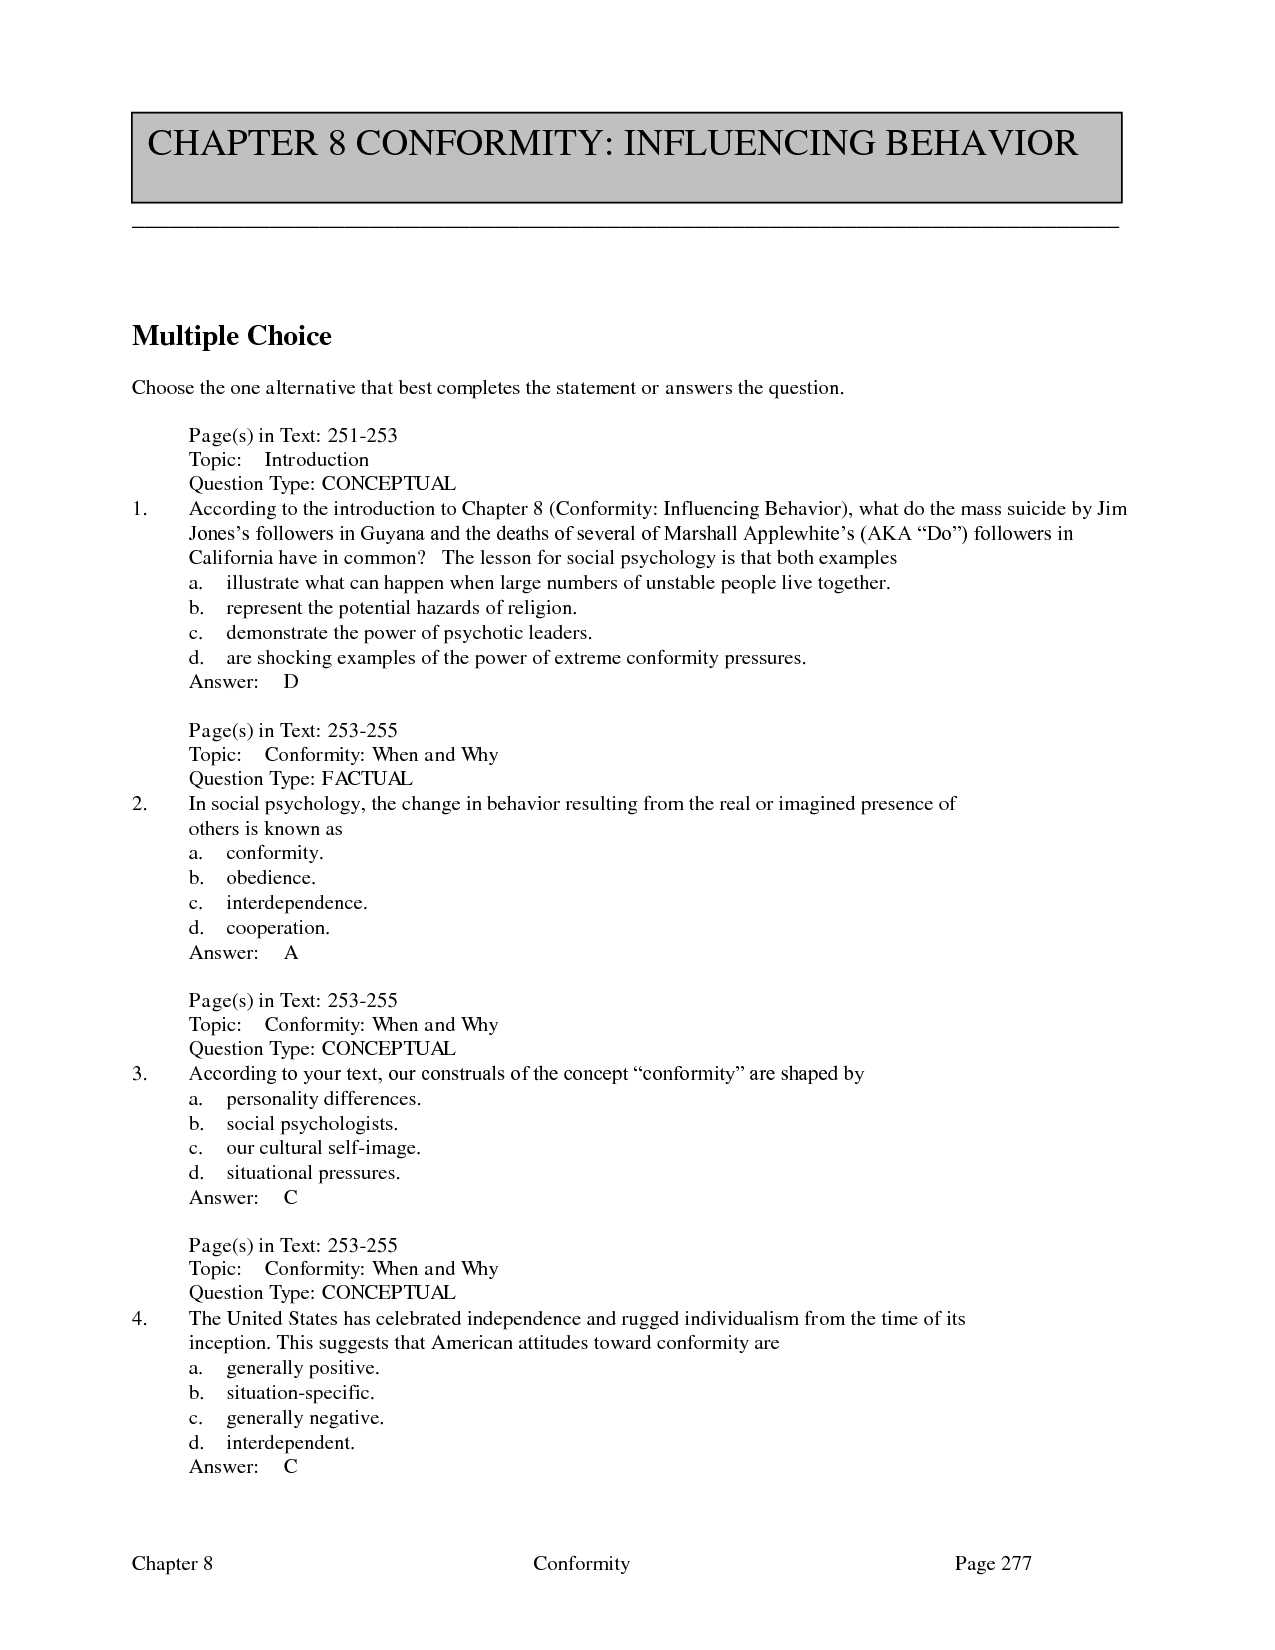 Skills Worksheet Concept Review Answer Key Holt Environmental Science Along with Gemütlich Anatomy and Physiology Chapter 8 Answers Ideen